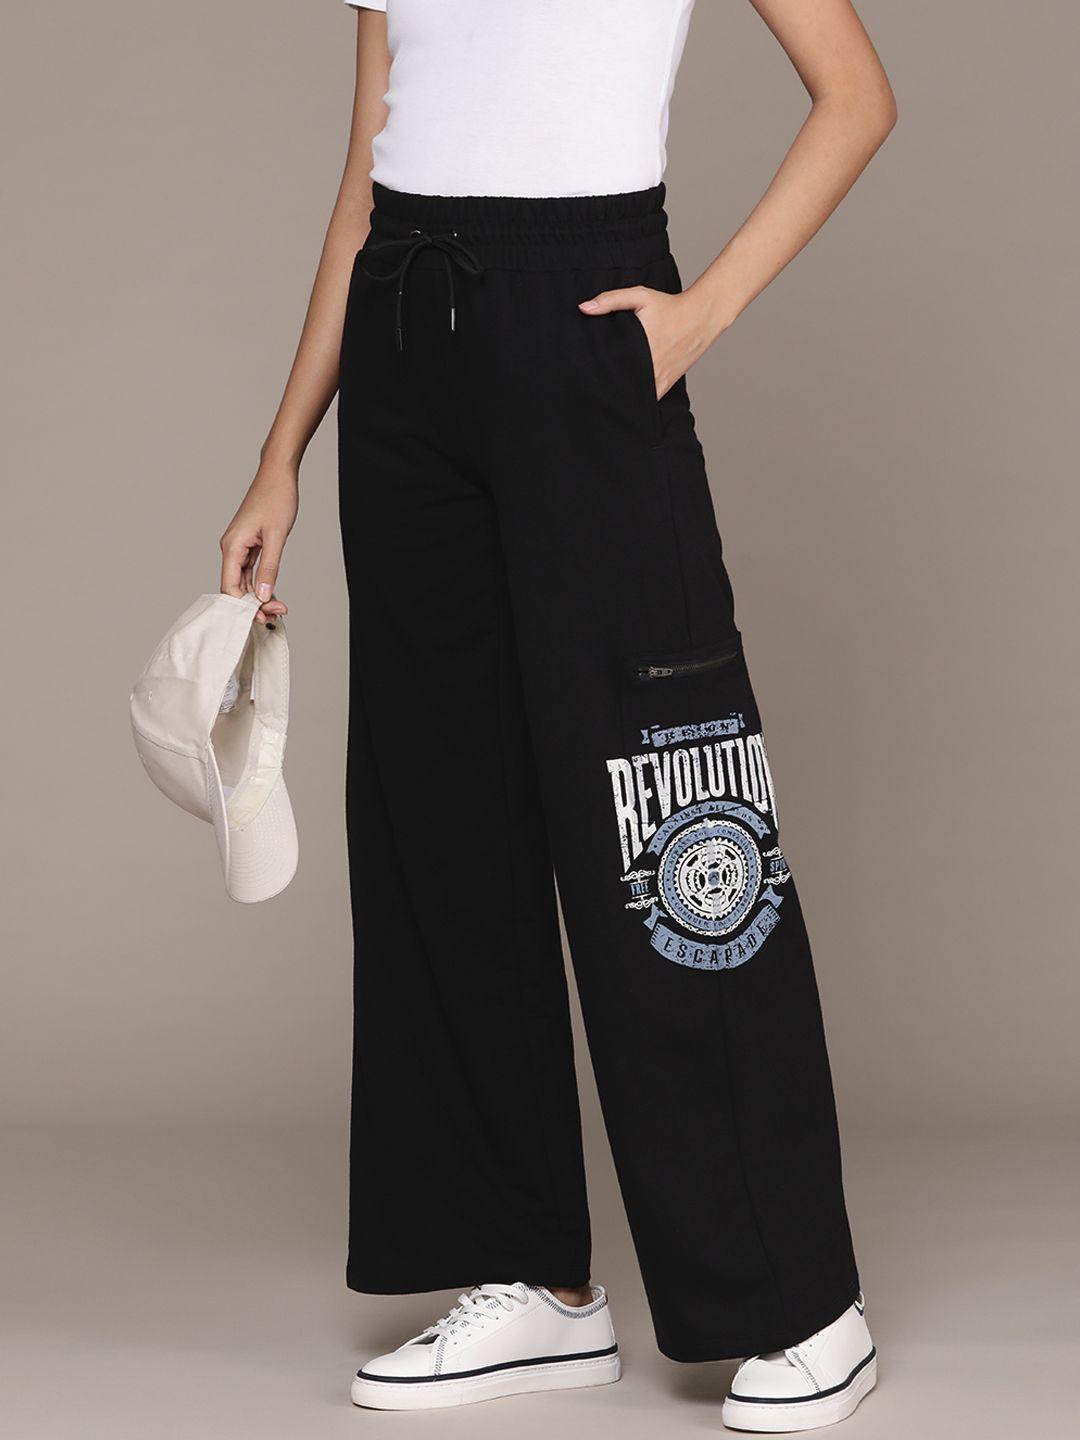 the roadster lifestyle co. x re/lax women printed straight fit track pants